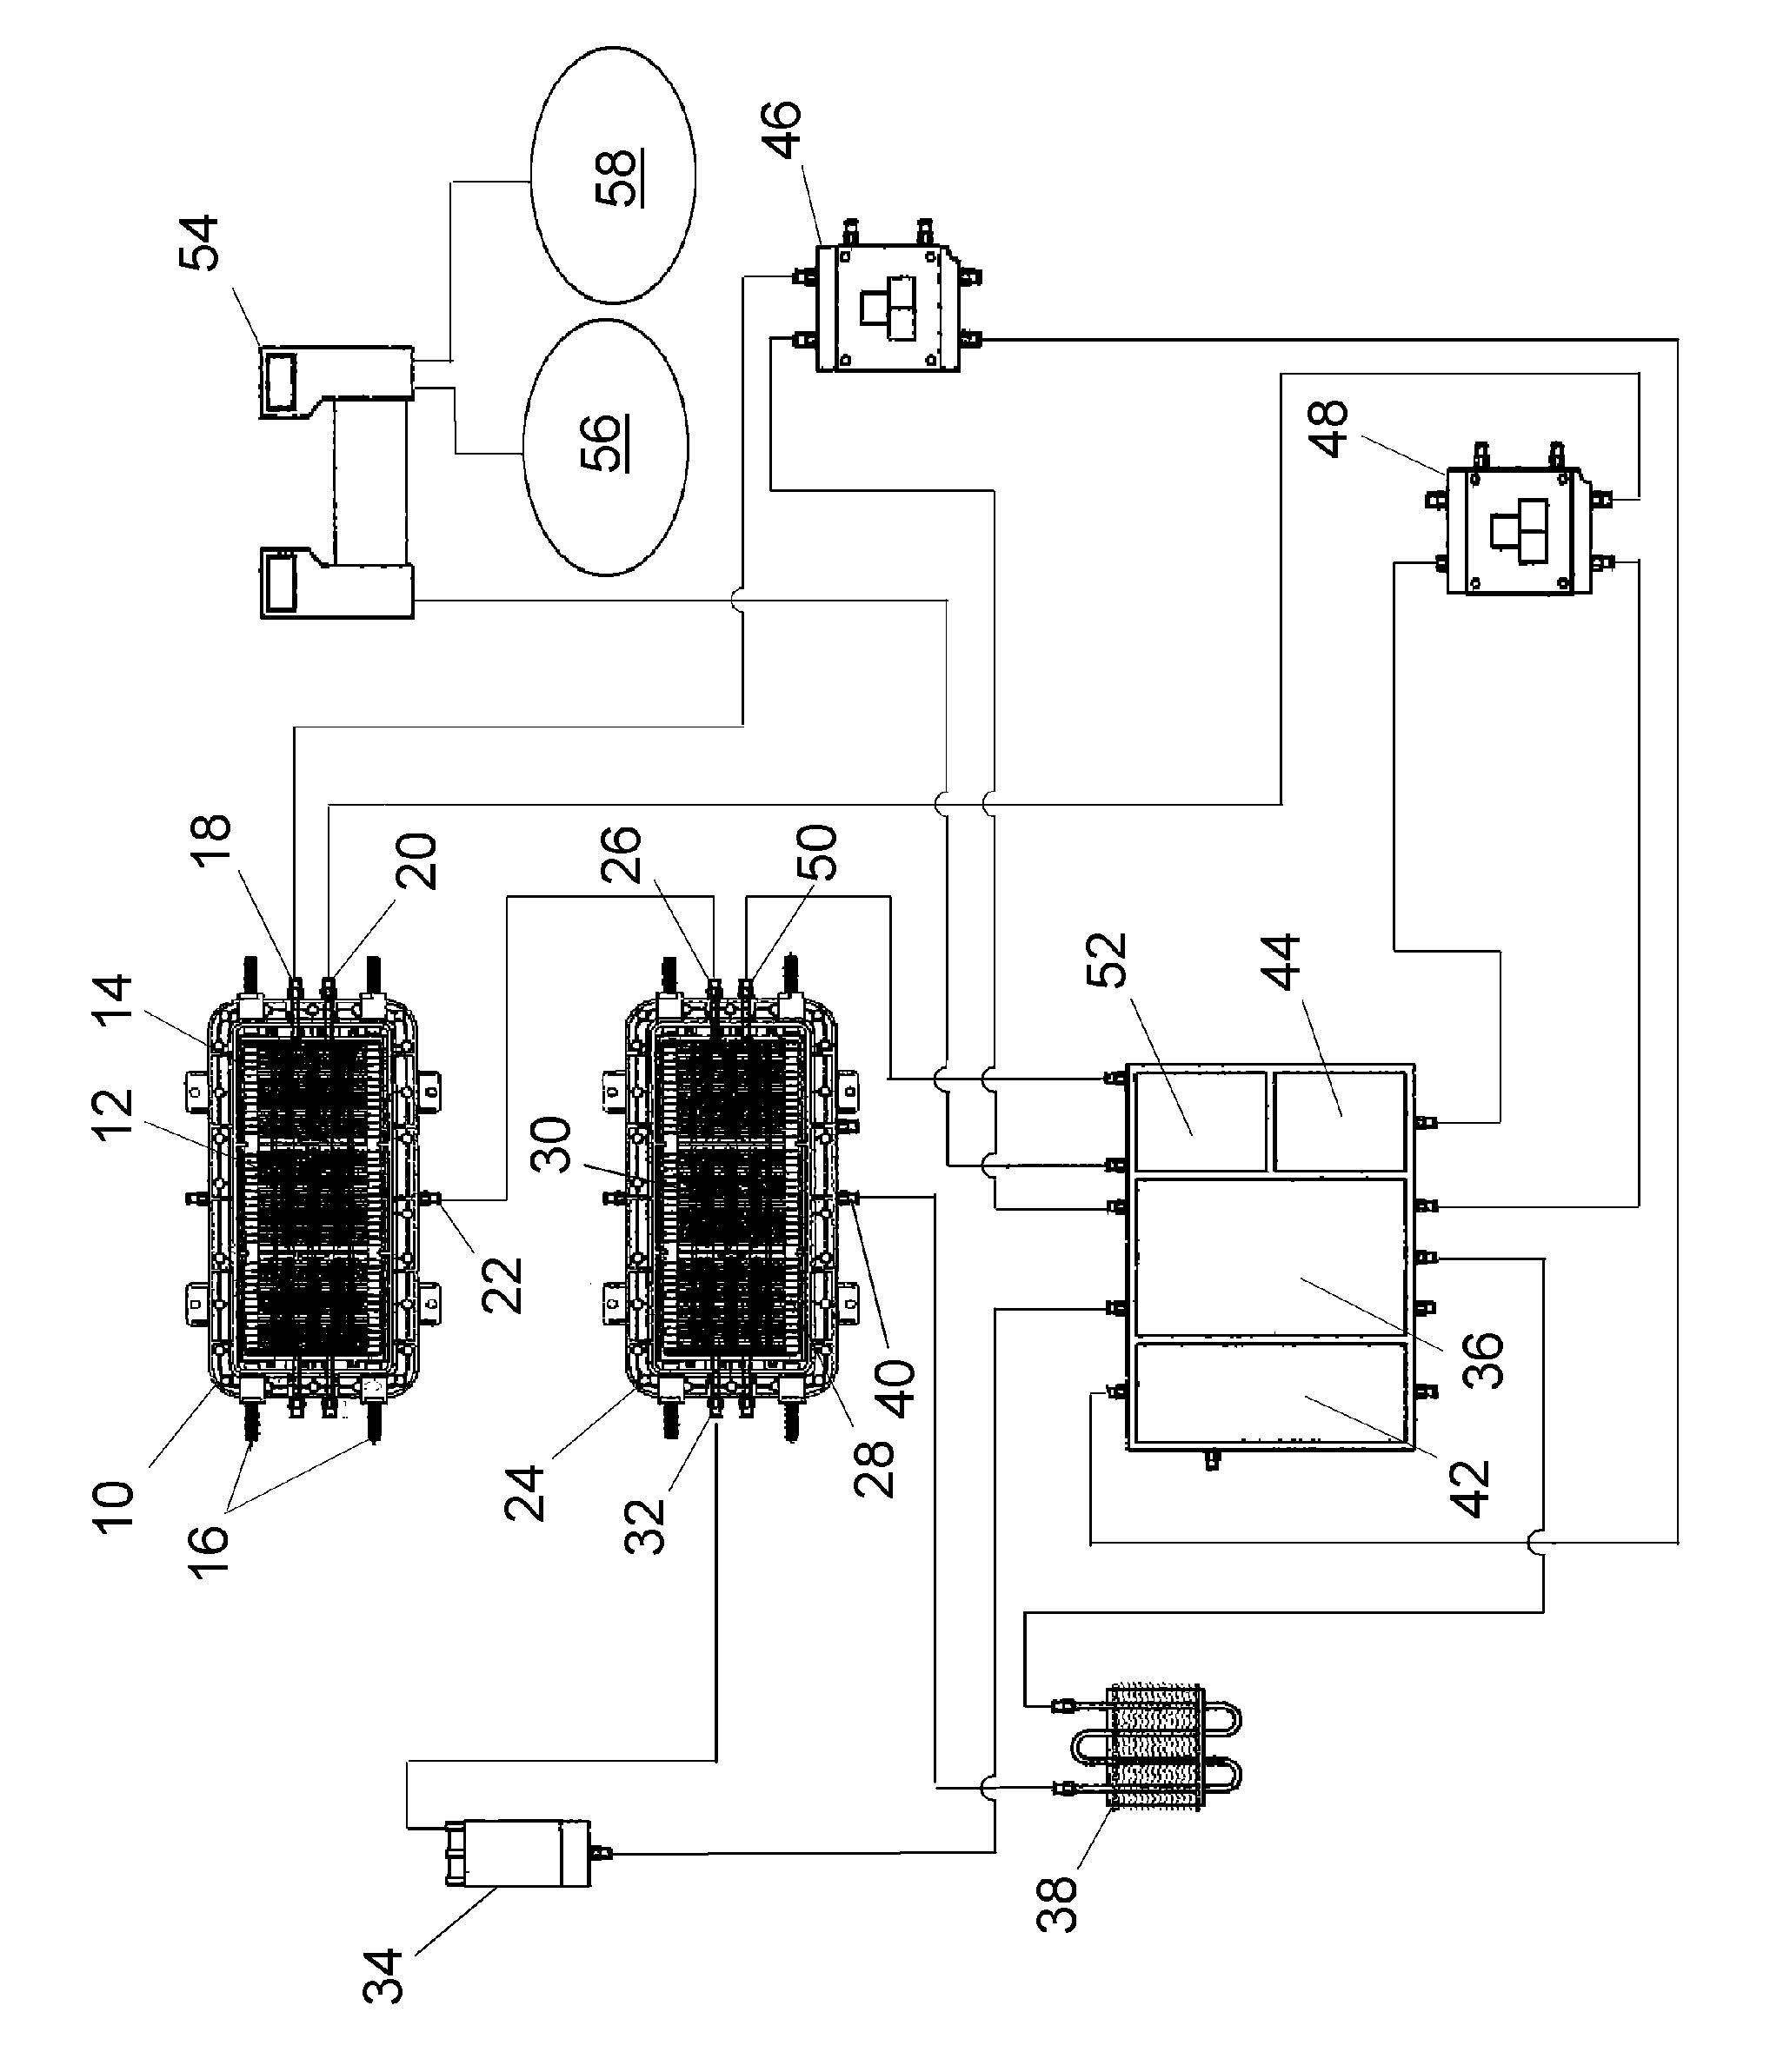 Process and apparatus for the preparation of combustible fluid